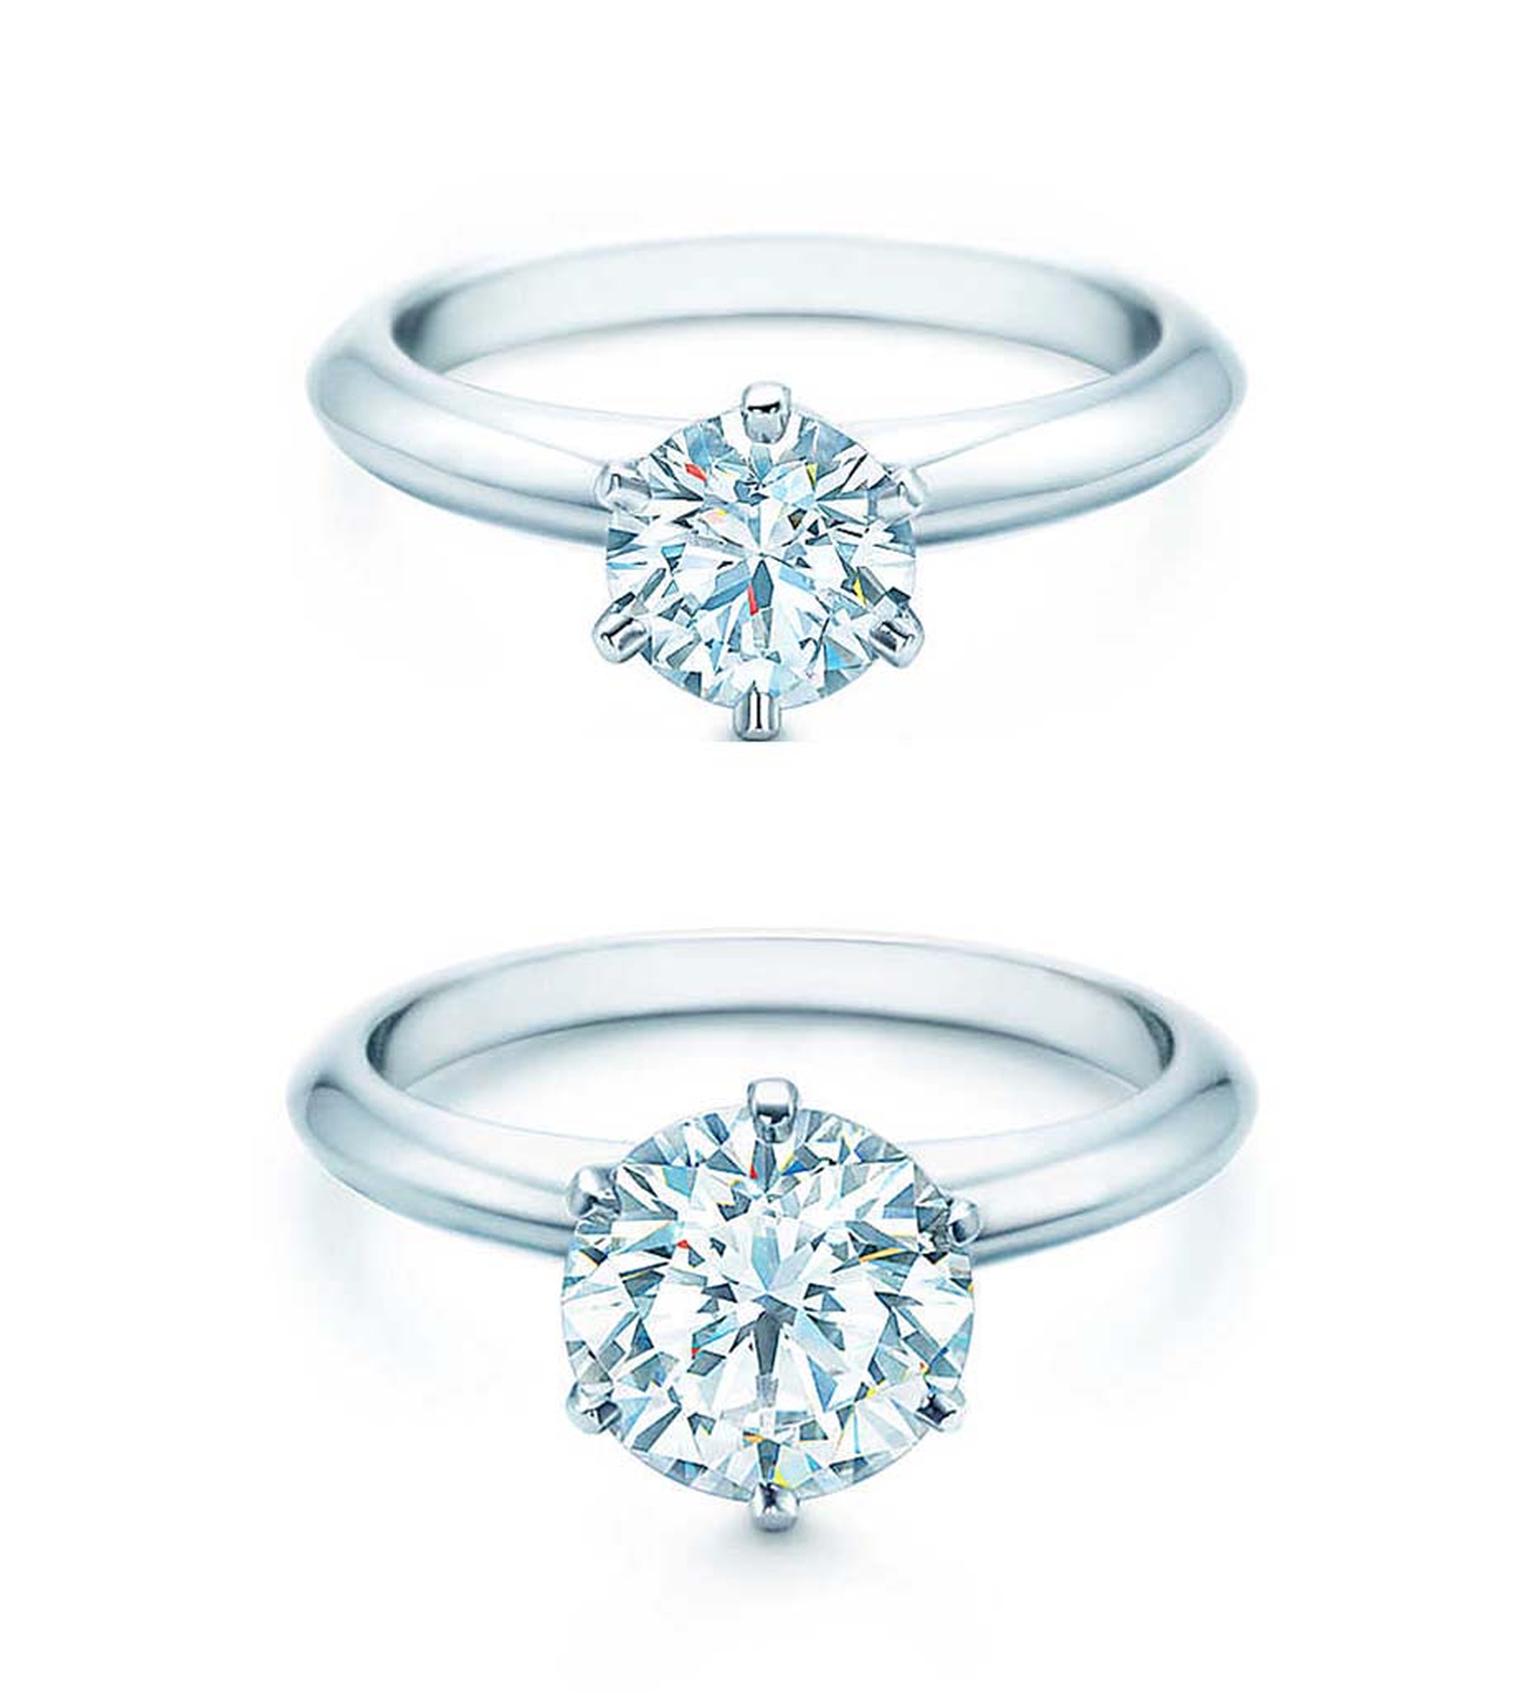 The Tiffany Setting diamond engagement ring shows the difference between a 1 carat diamond and 2 carat diamond